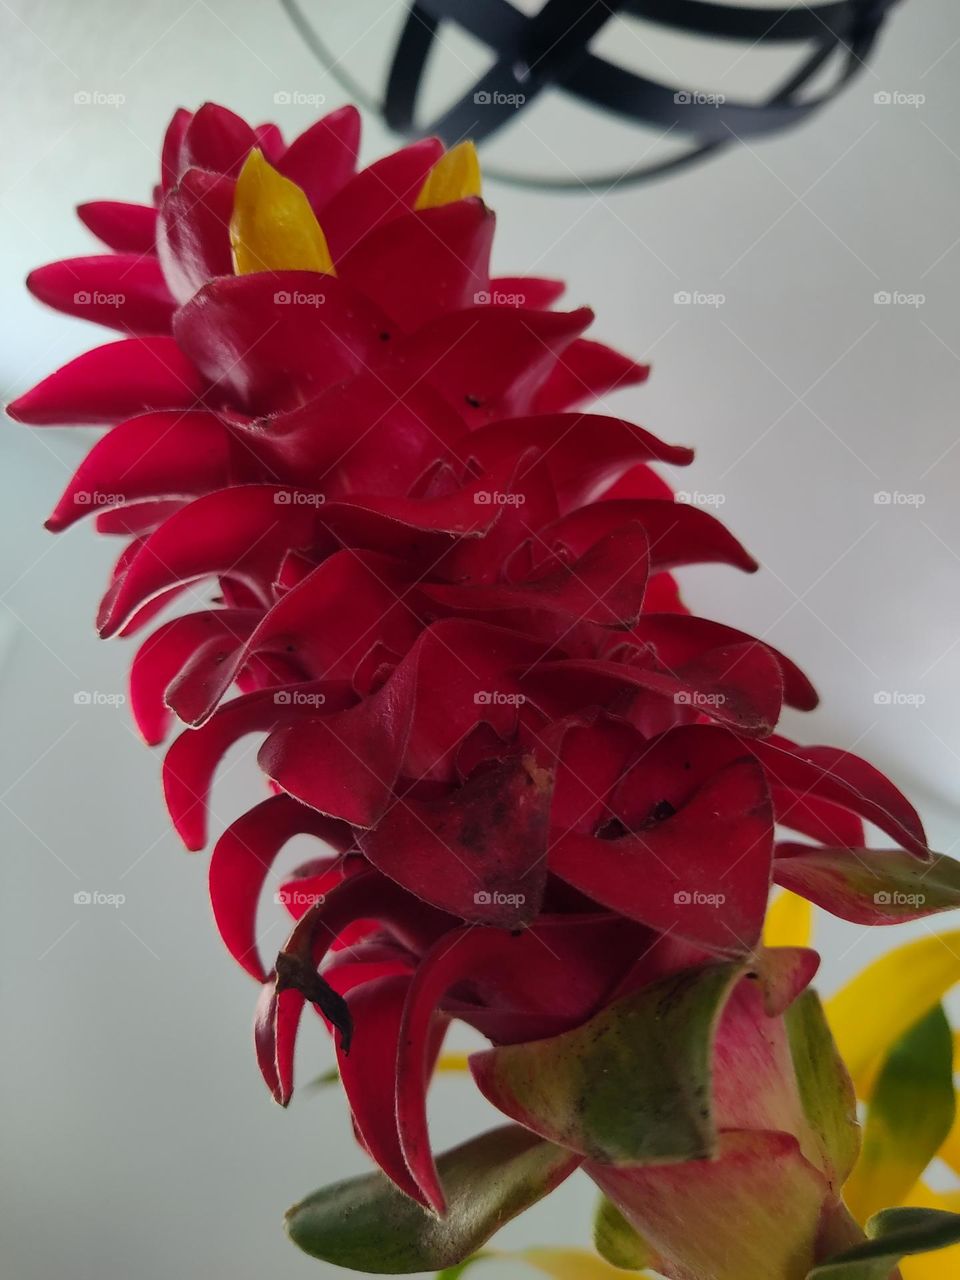 red towering flower with yellow hidden gems slowly emerging from within